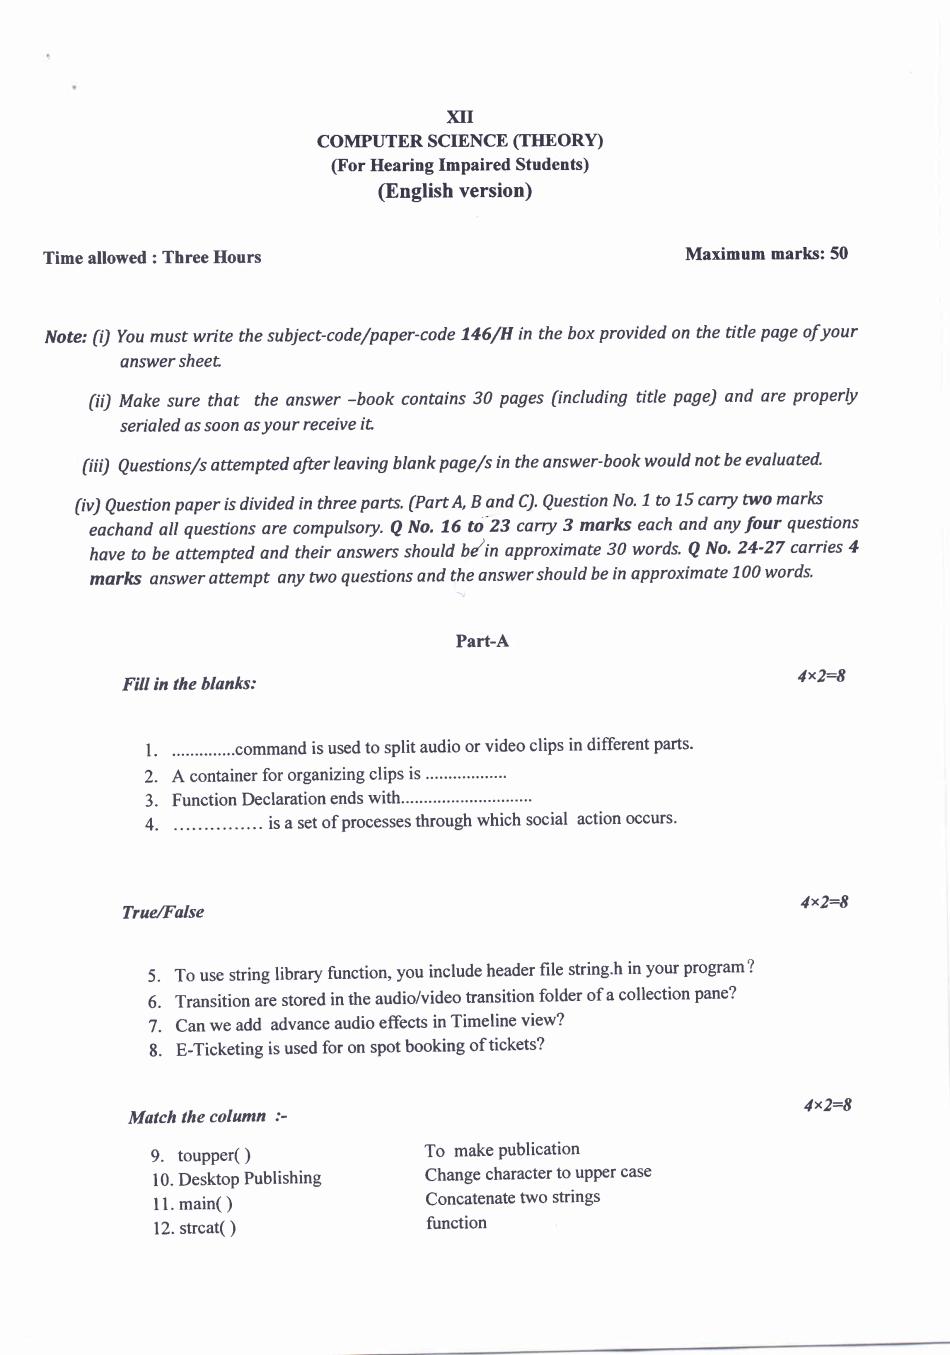 PSEB 12th Model Test Paper of Computer Science (Theory) - Page 1